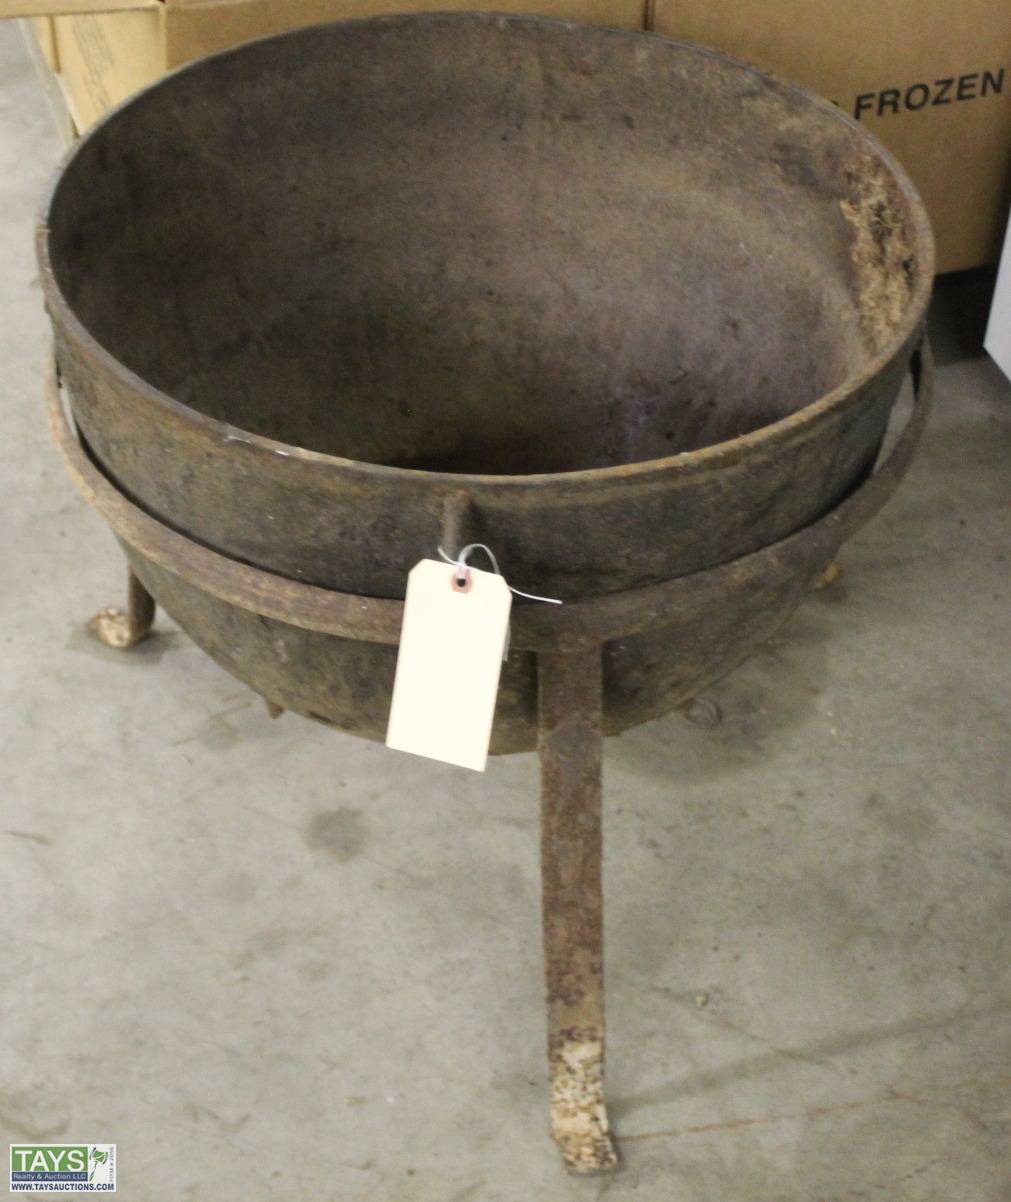 Sold at Auction: Large Cast Iron Dutch Oven